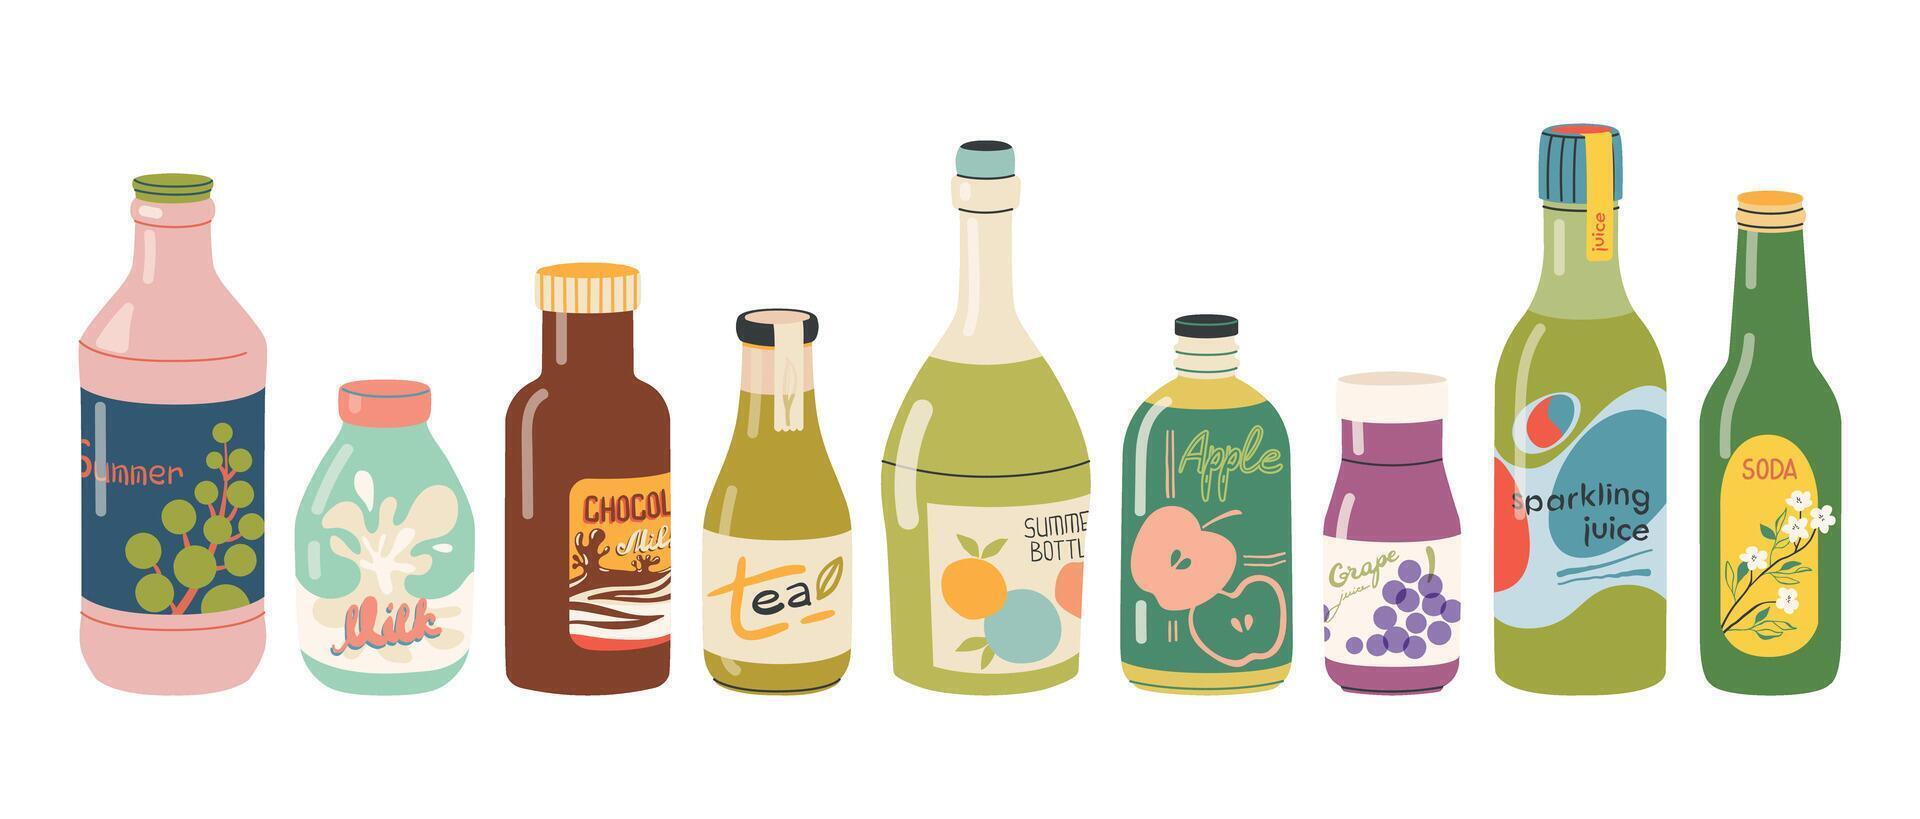 Drinks in glass bottles set. Fruit juices, soda water, tea, sweet sparkling water, chocolate milk, and other cold summer beverages. Flat vector hand drawn illustration on a white background.